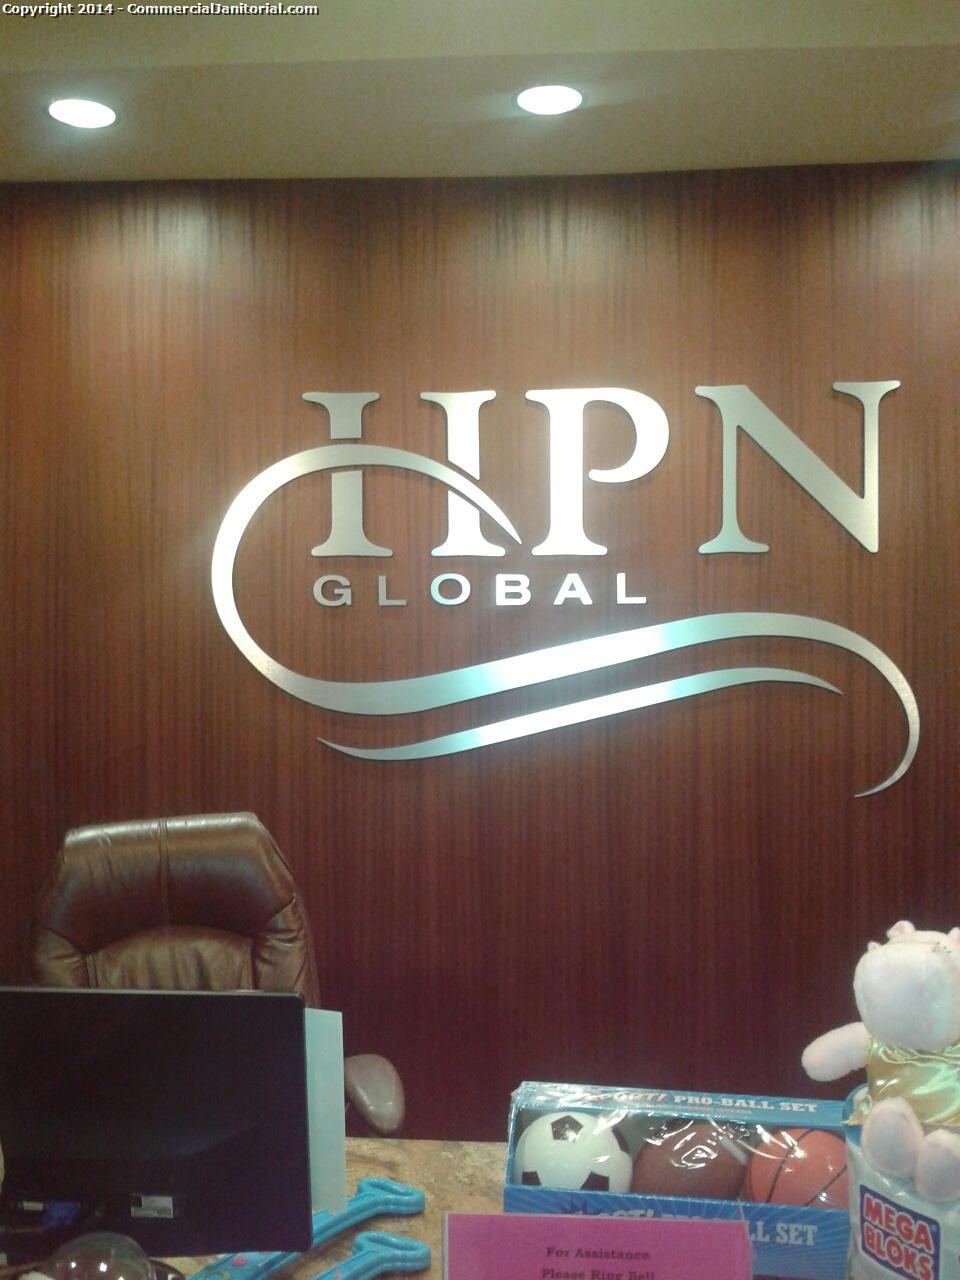 HPN Global sign was cleaned with stainless steel to remove all finger marks , walls were cleaned , Reception area was cleaned nothing was moved left as is ; cleaner just removed all dust . Cleaned monitor , computer screens , disinfected both keyboard and mouse . Everything looks to be very well maintained 